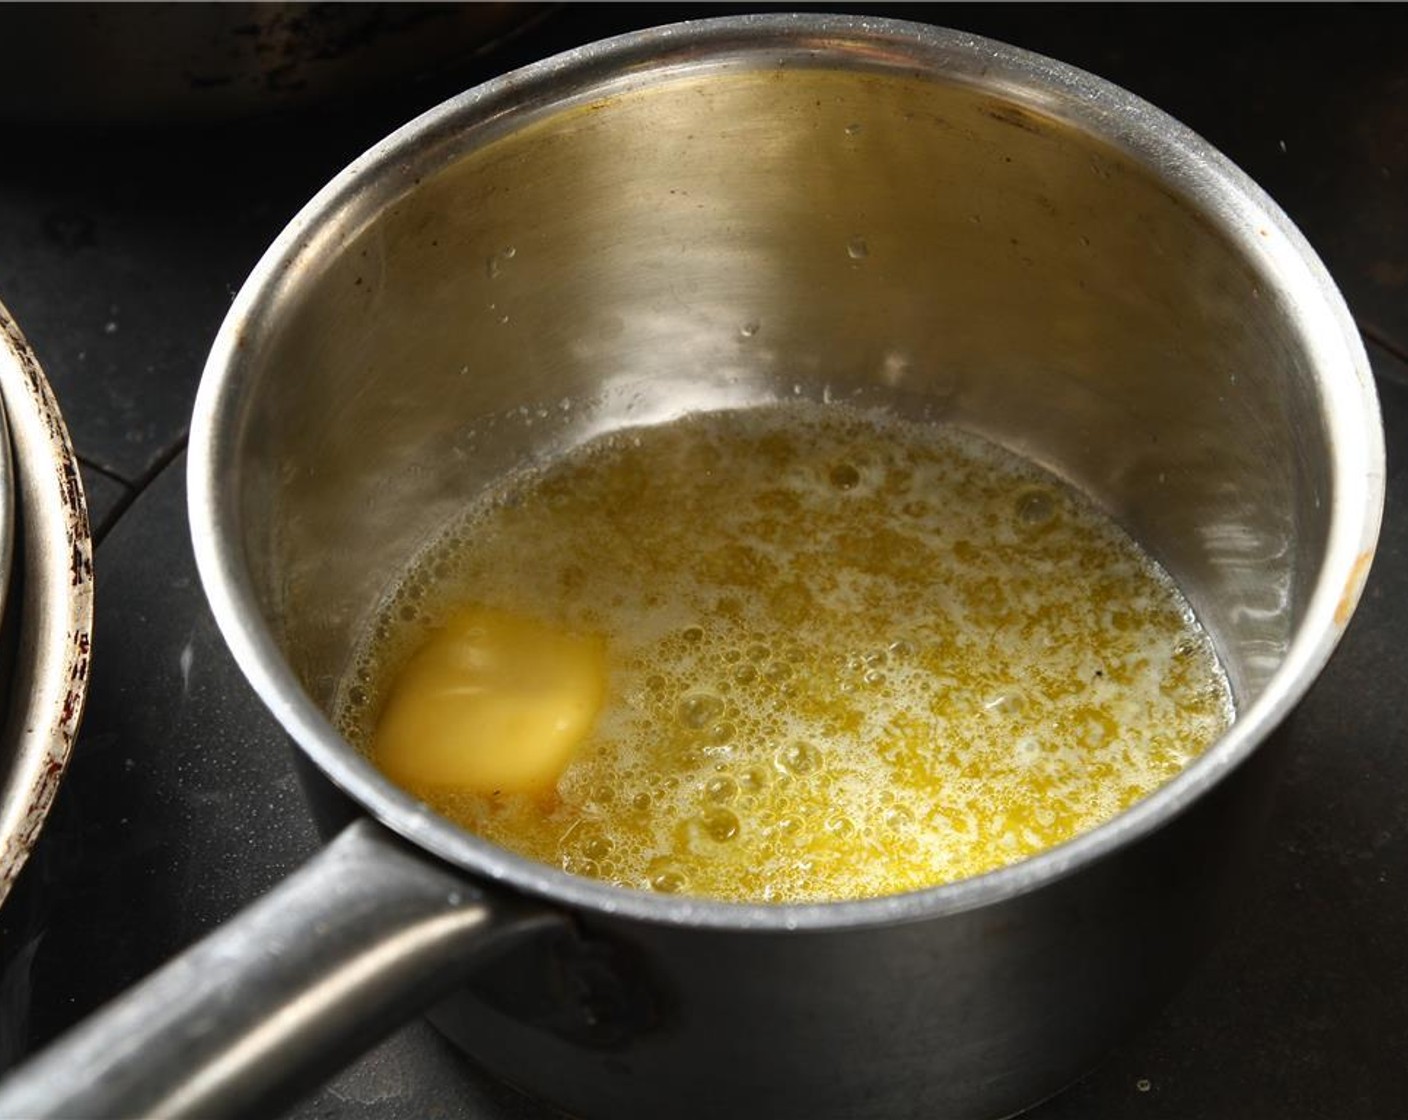 step 28 To make brown butter simply add Butter (2 Tbsp) to a small saucepan and heat over medium heat until milk solids reach a medium brown color on the bottom and your pan starts smelling of hazelnuts and toast, remove from heat.